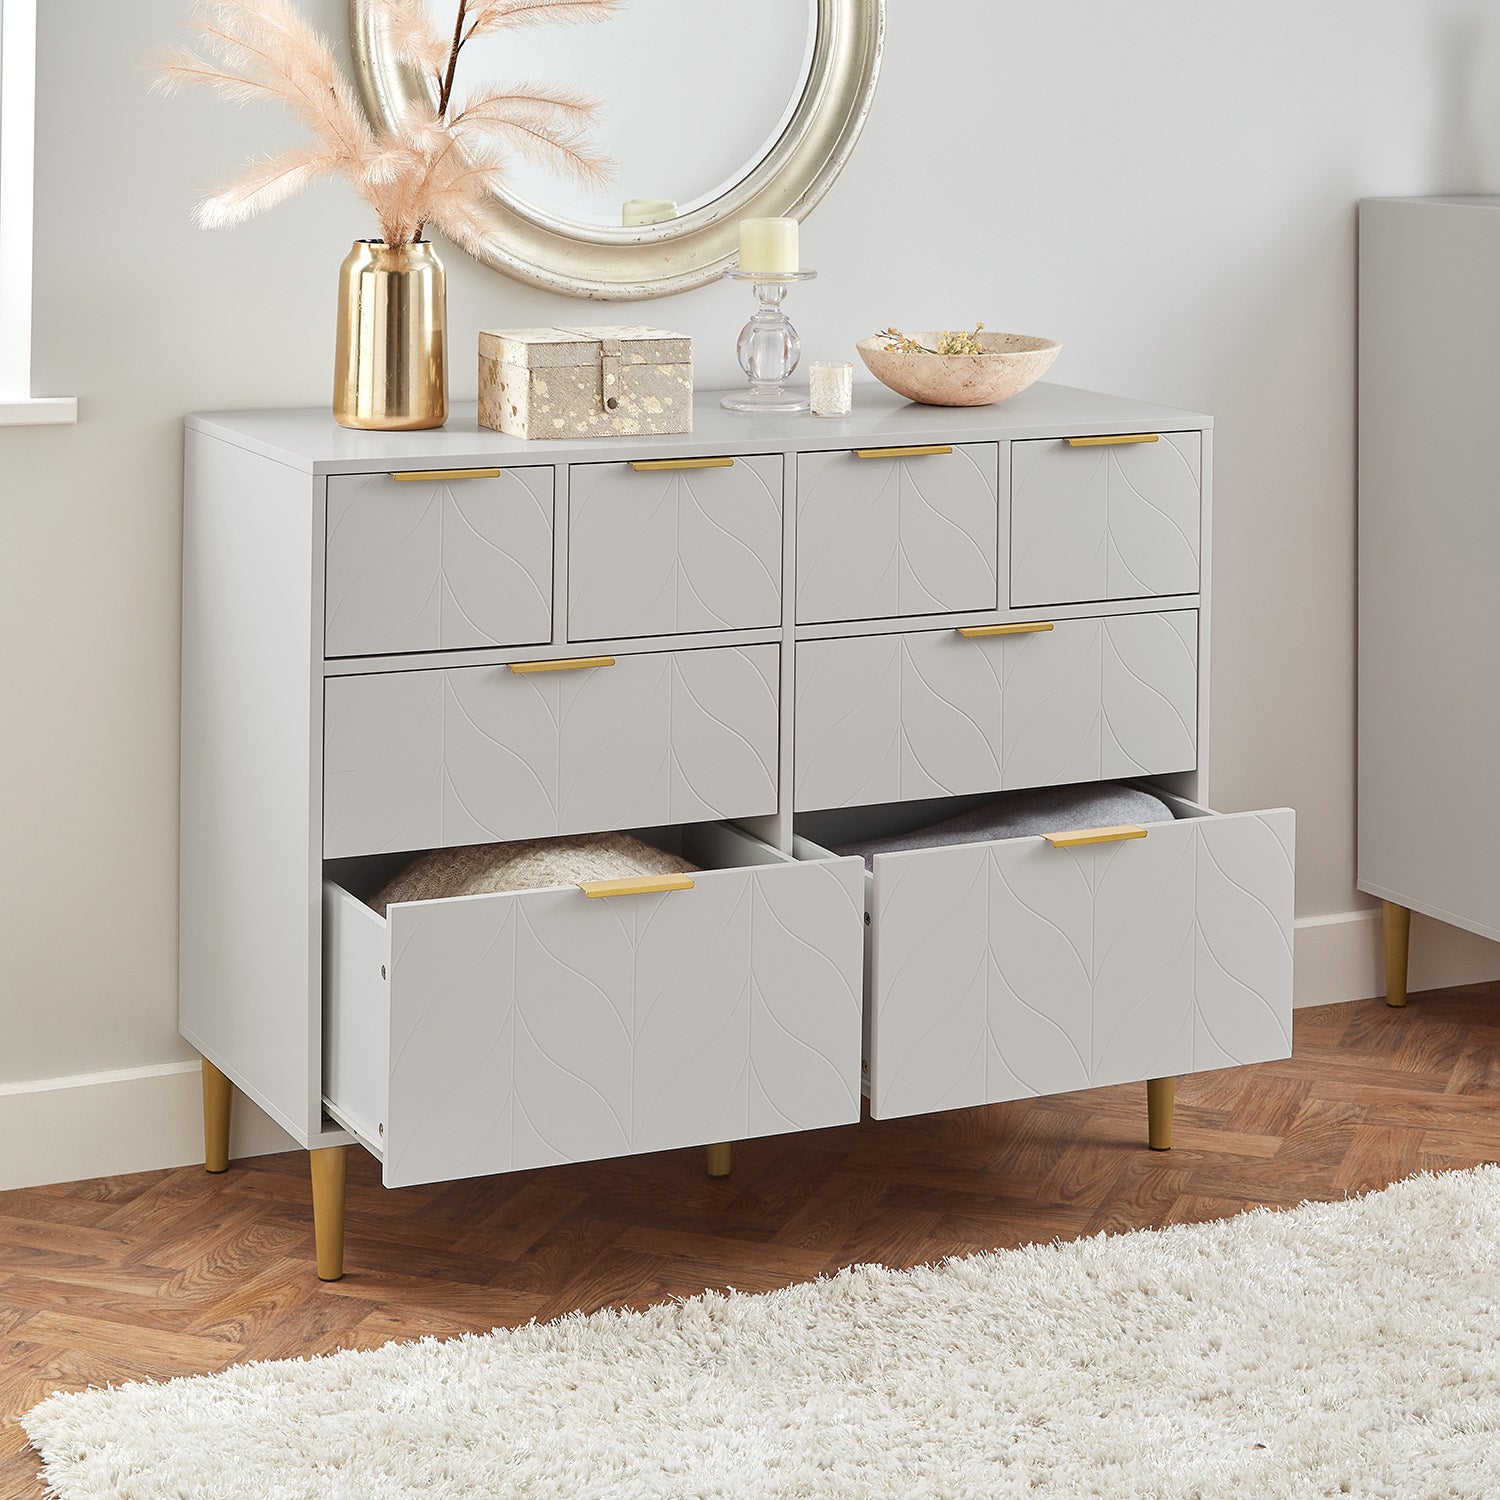 Gloria chest of drawers - 4 over 4 - grey & brass effect - laura James